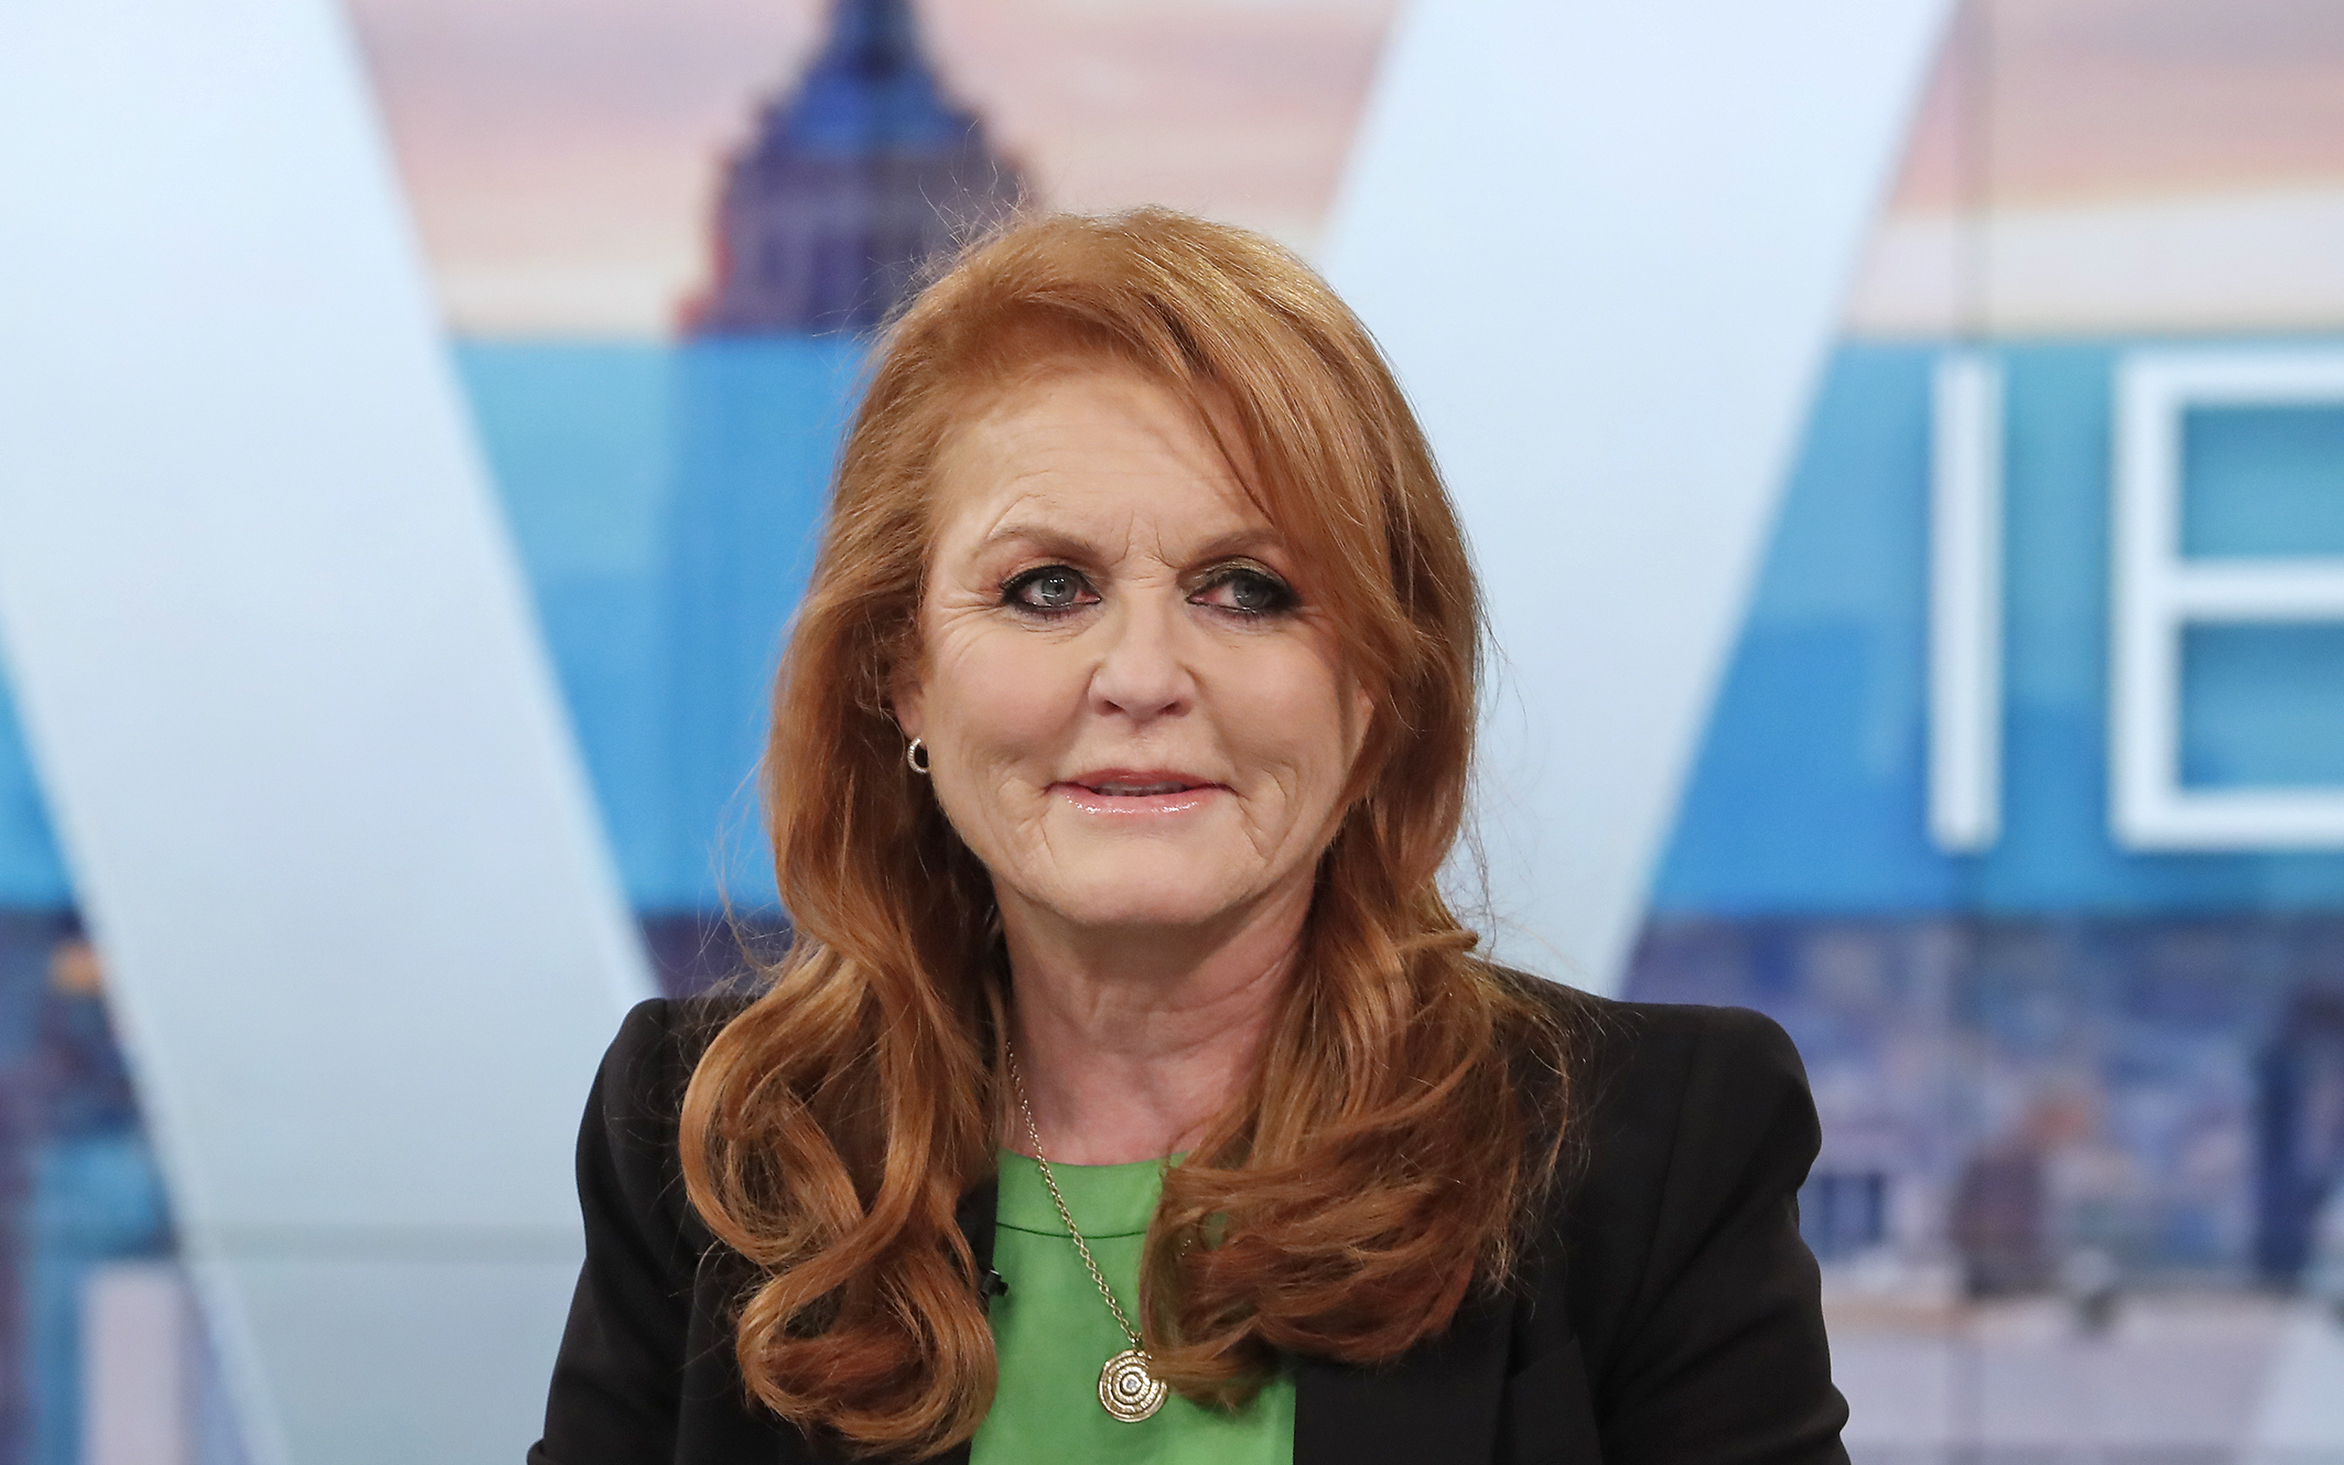 Sarah Ferguson, Duchess of York, diagnosed with melanoma after overcoming breast cancer